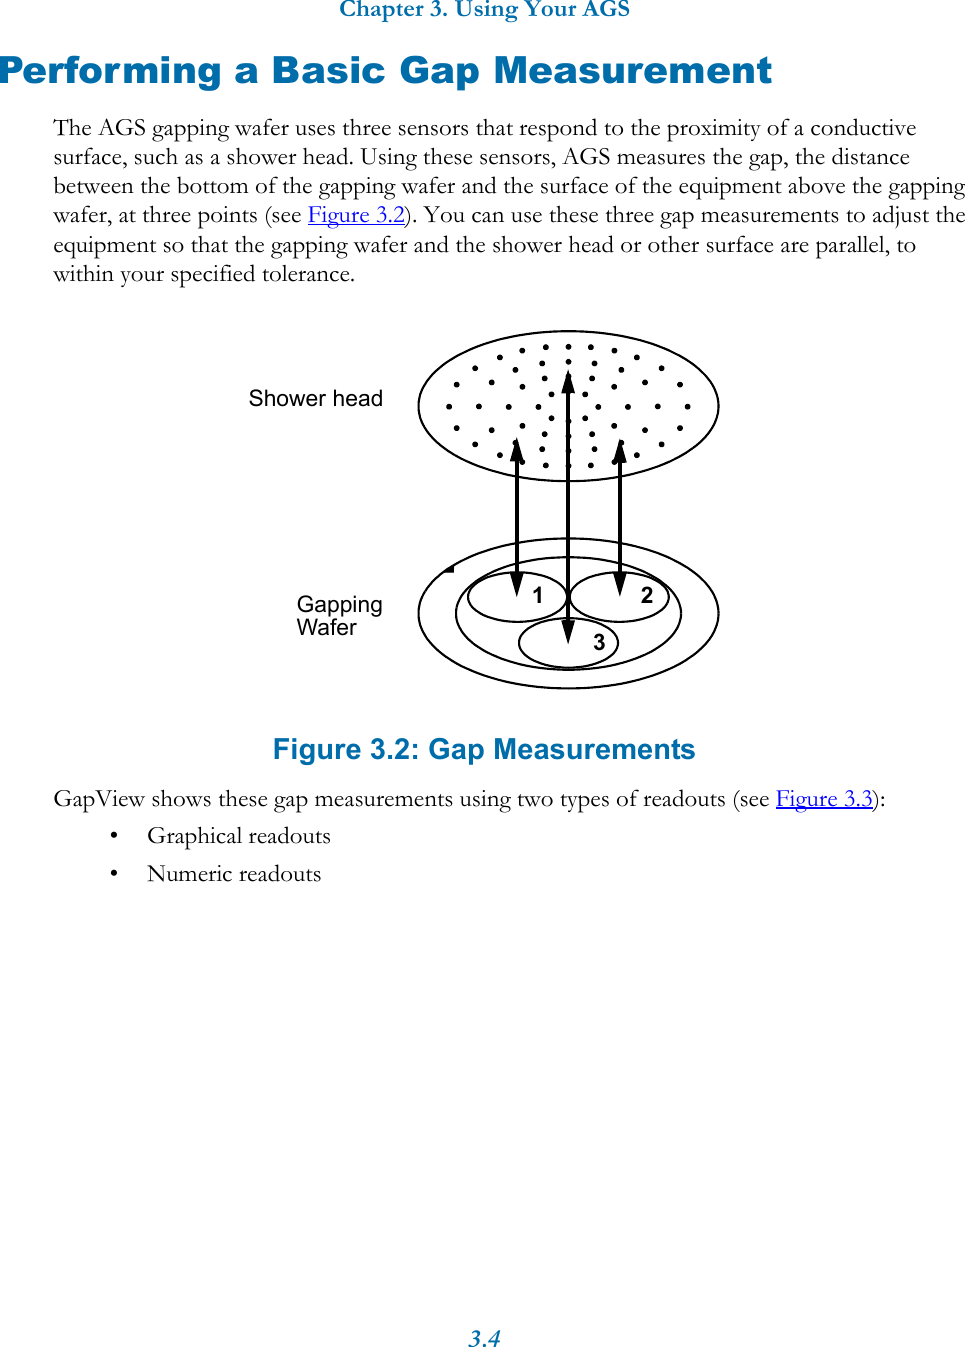 Chapter 3. Using Your AGS3.4Performing a Basic Gap MeasurementThe AGS gapping wafer uses three sensors that respond to the proximity of a conductive surface, such as a shower head. Using these sensors, AGS measures the gap, the distance between the bottom of the gapping wafer and the surface of the equipment above the gapping wafer, at three points (see Figure 3.2). You can use these three gap measurements to adjust the equipment so that the gapping wafer and the shower head or other surface are parallel, to within your specified tolerance. Figure 3.2: Gap MeasurementsGapView shows these gap measurements using two types of readouts (see Figure 3.3):• Graphical readouts • Numeric readouts 123Shower headGapping Wafer